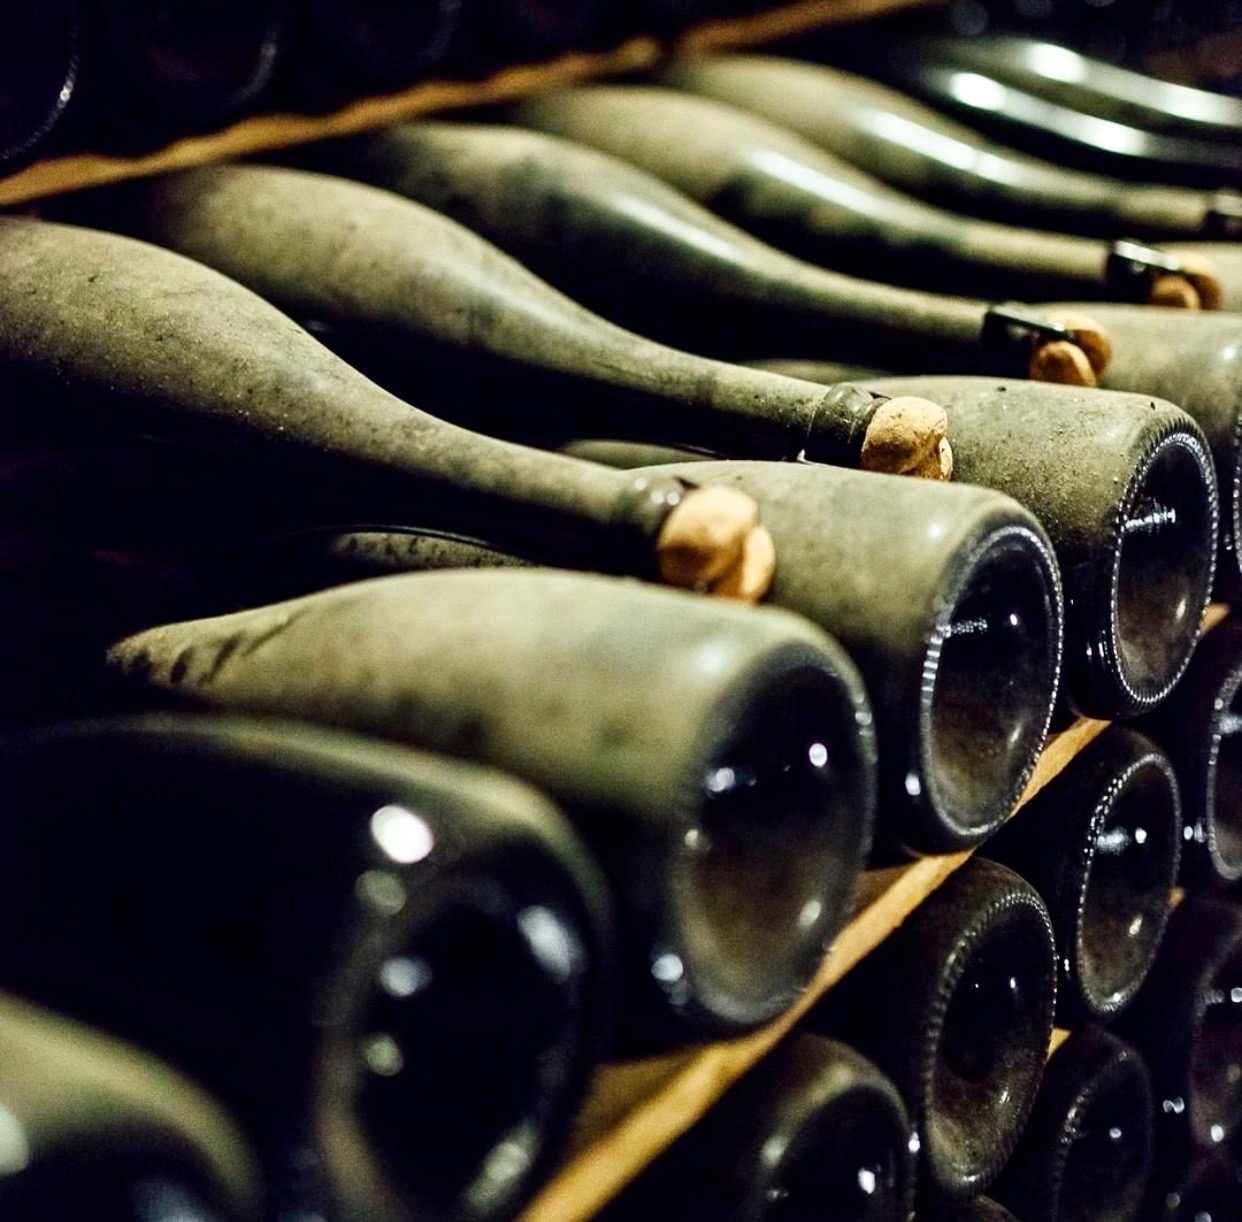 The Changing Perception of Cava: An interview with Javier Pagés, President of DO Cava